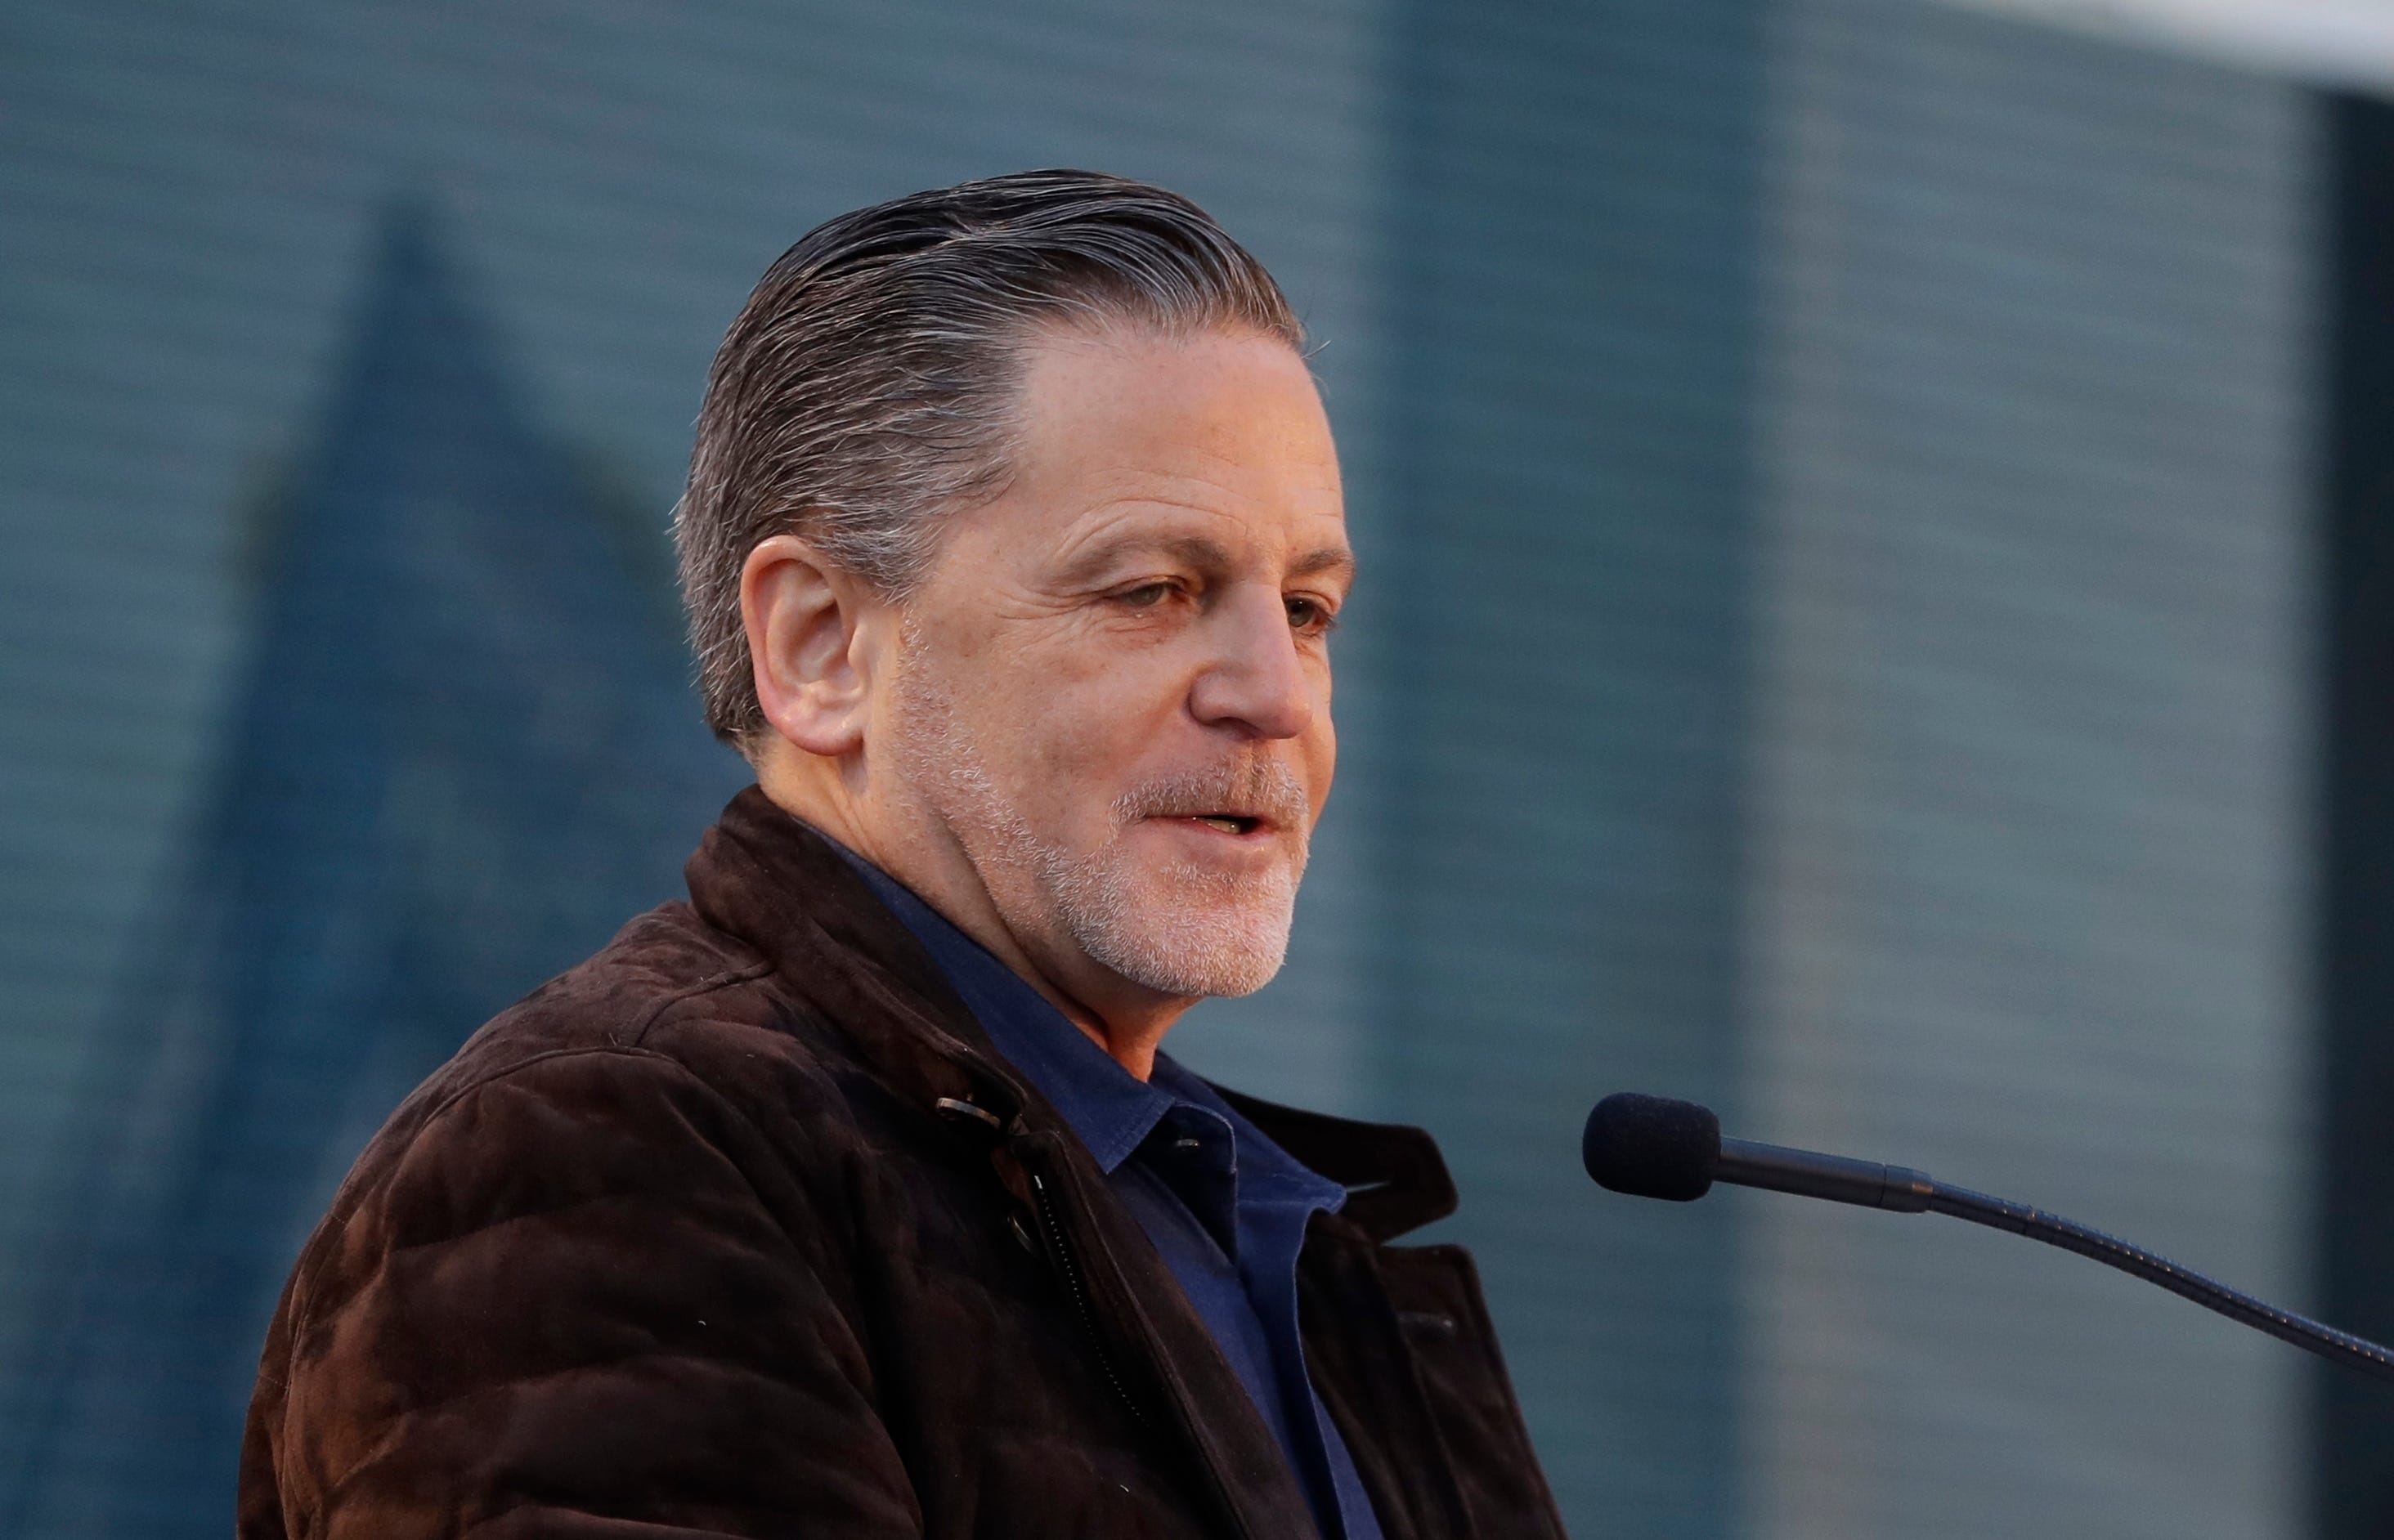 Detroit businessman Dan Gilbert will continue his deposition with the U.S. Justice Department in its lawsuit against Quicken Loans, a federal judge ruled Wednesday.